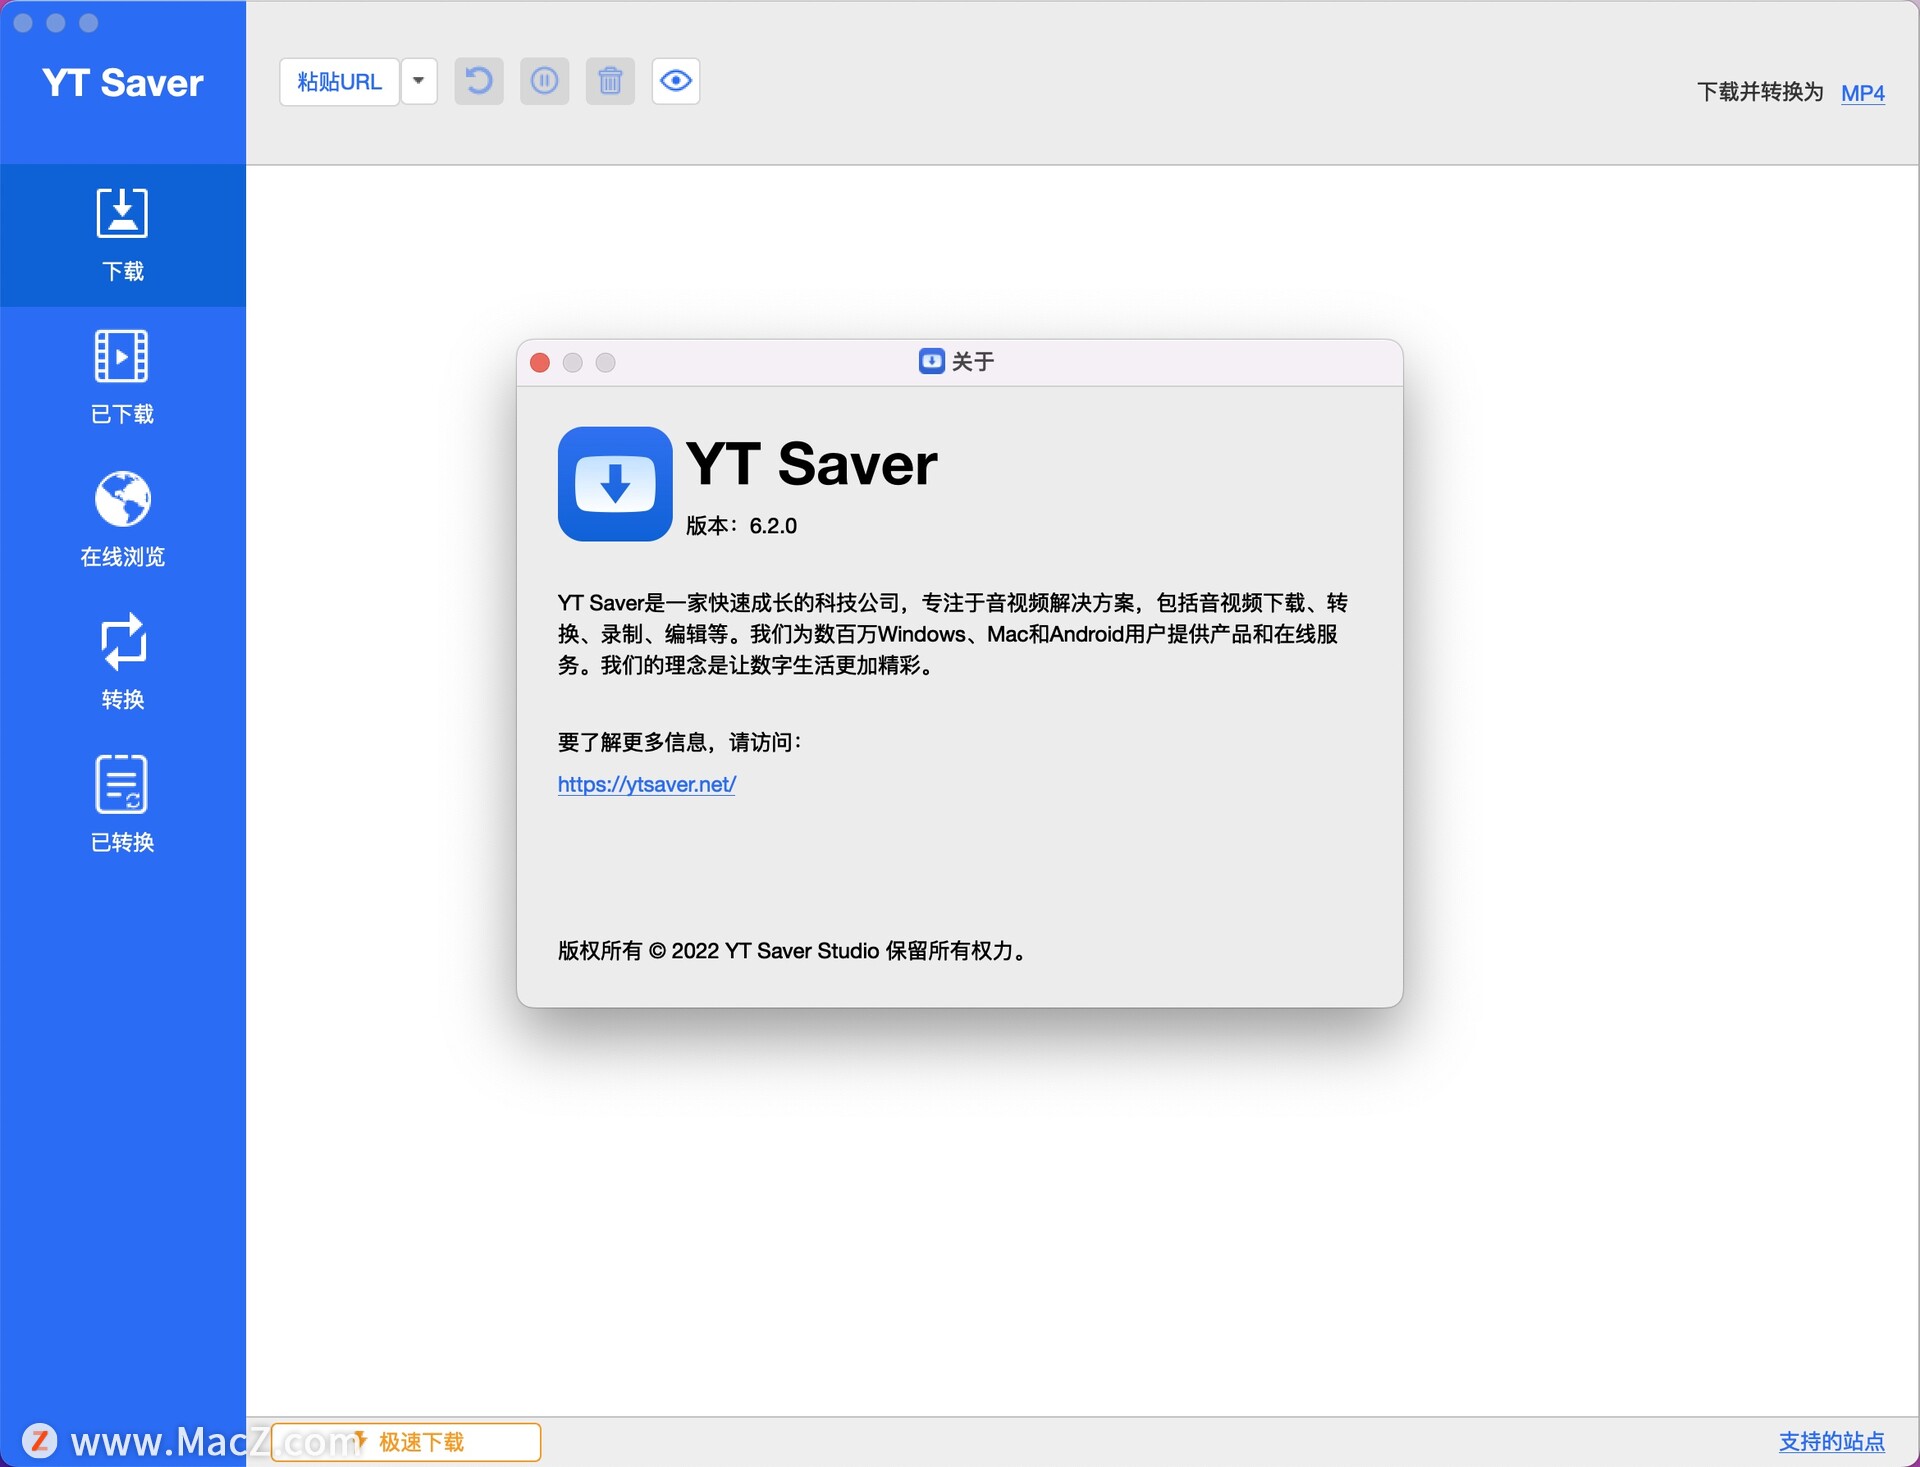 YT Saver 7.0.2 for ios download